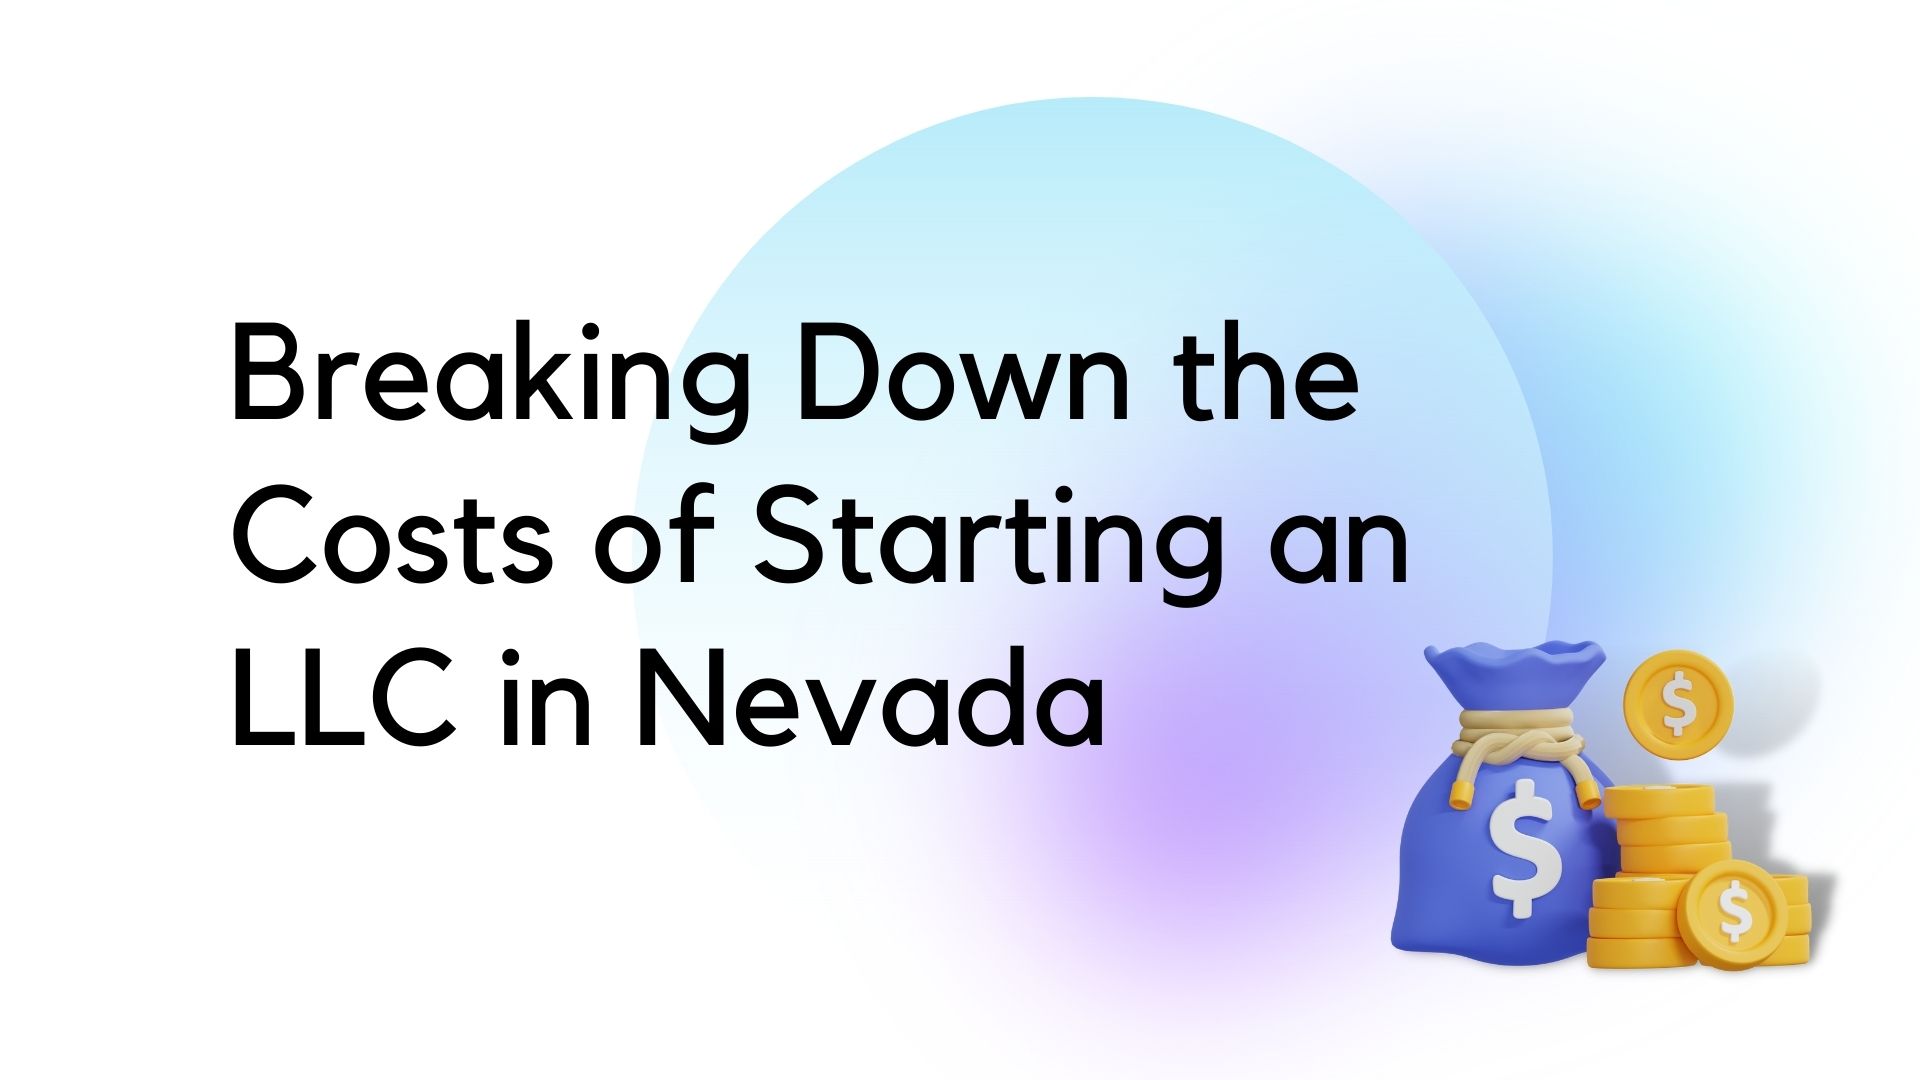 Breaking Down the Costs of Starting an LLC in Nevada